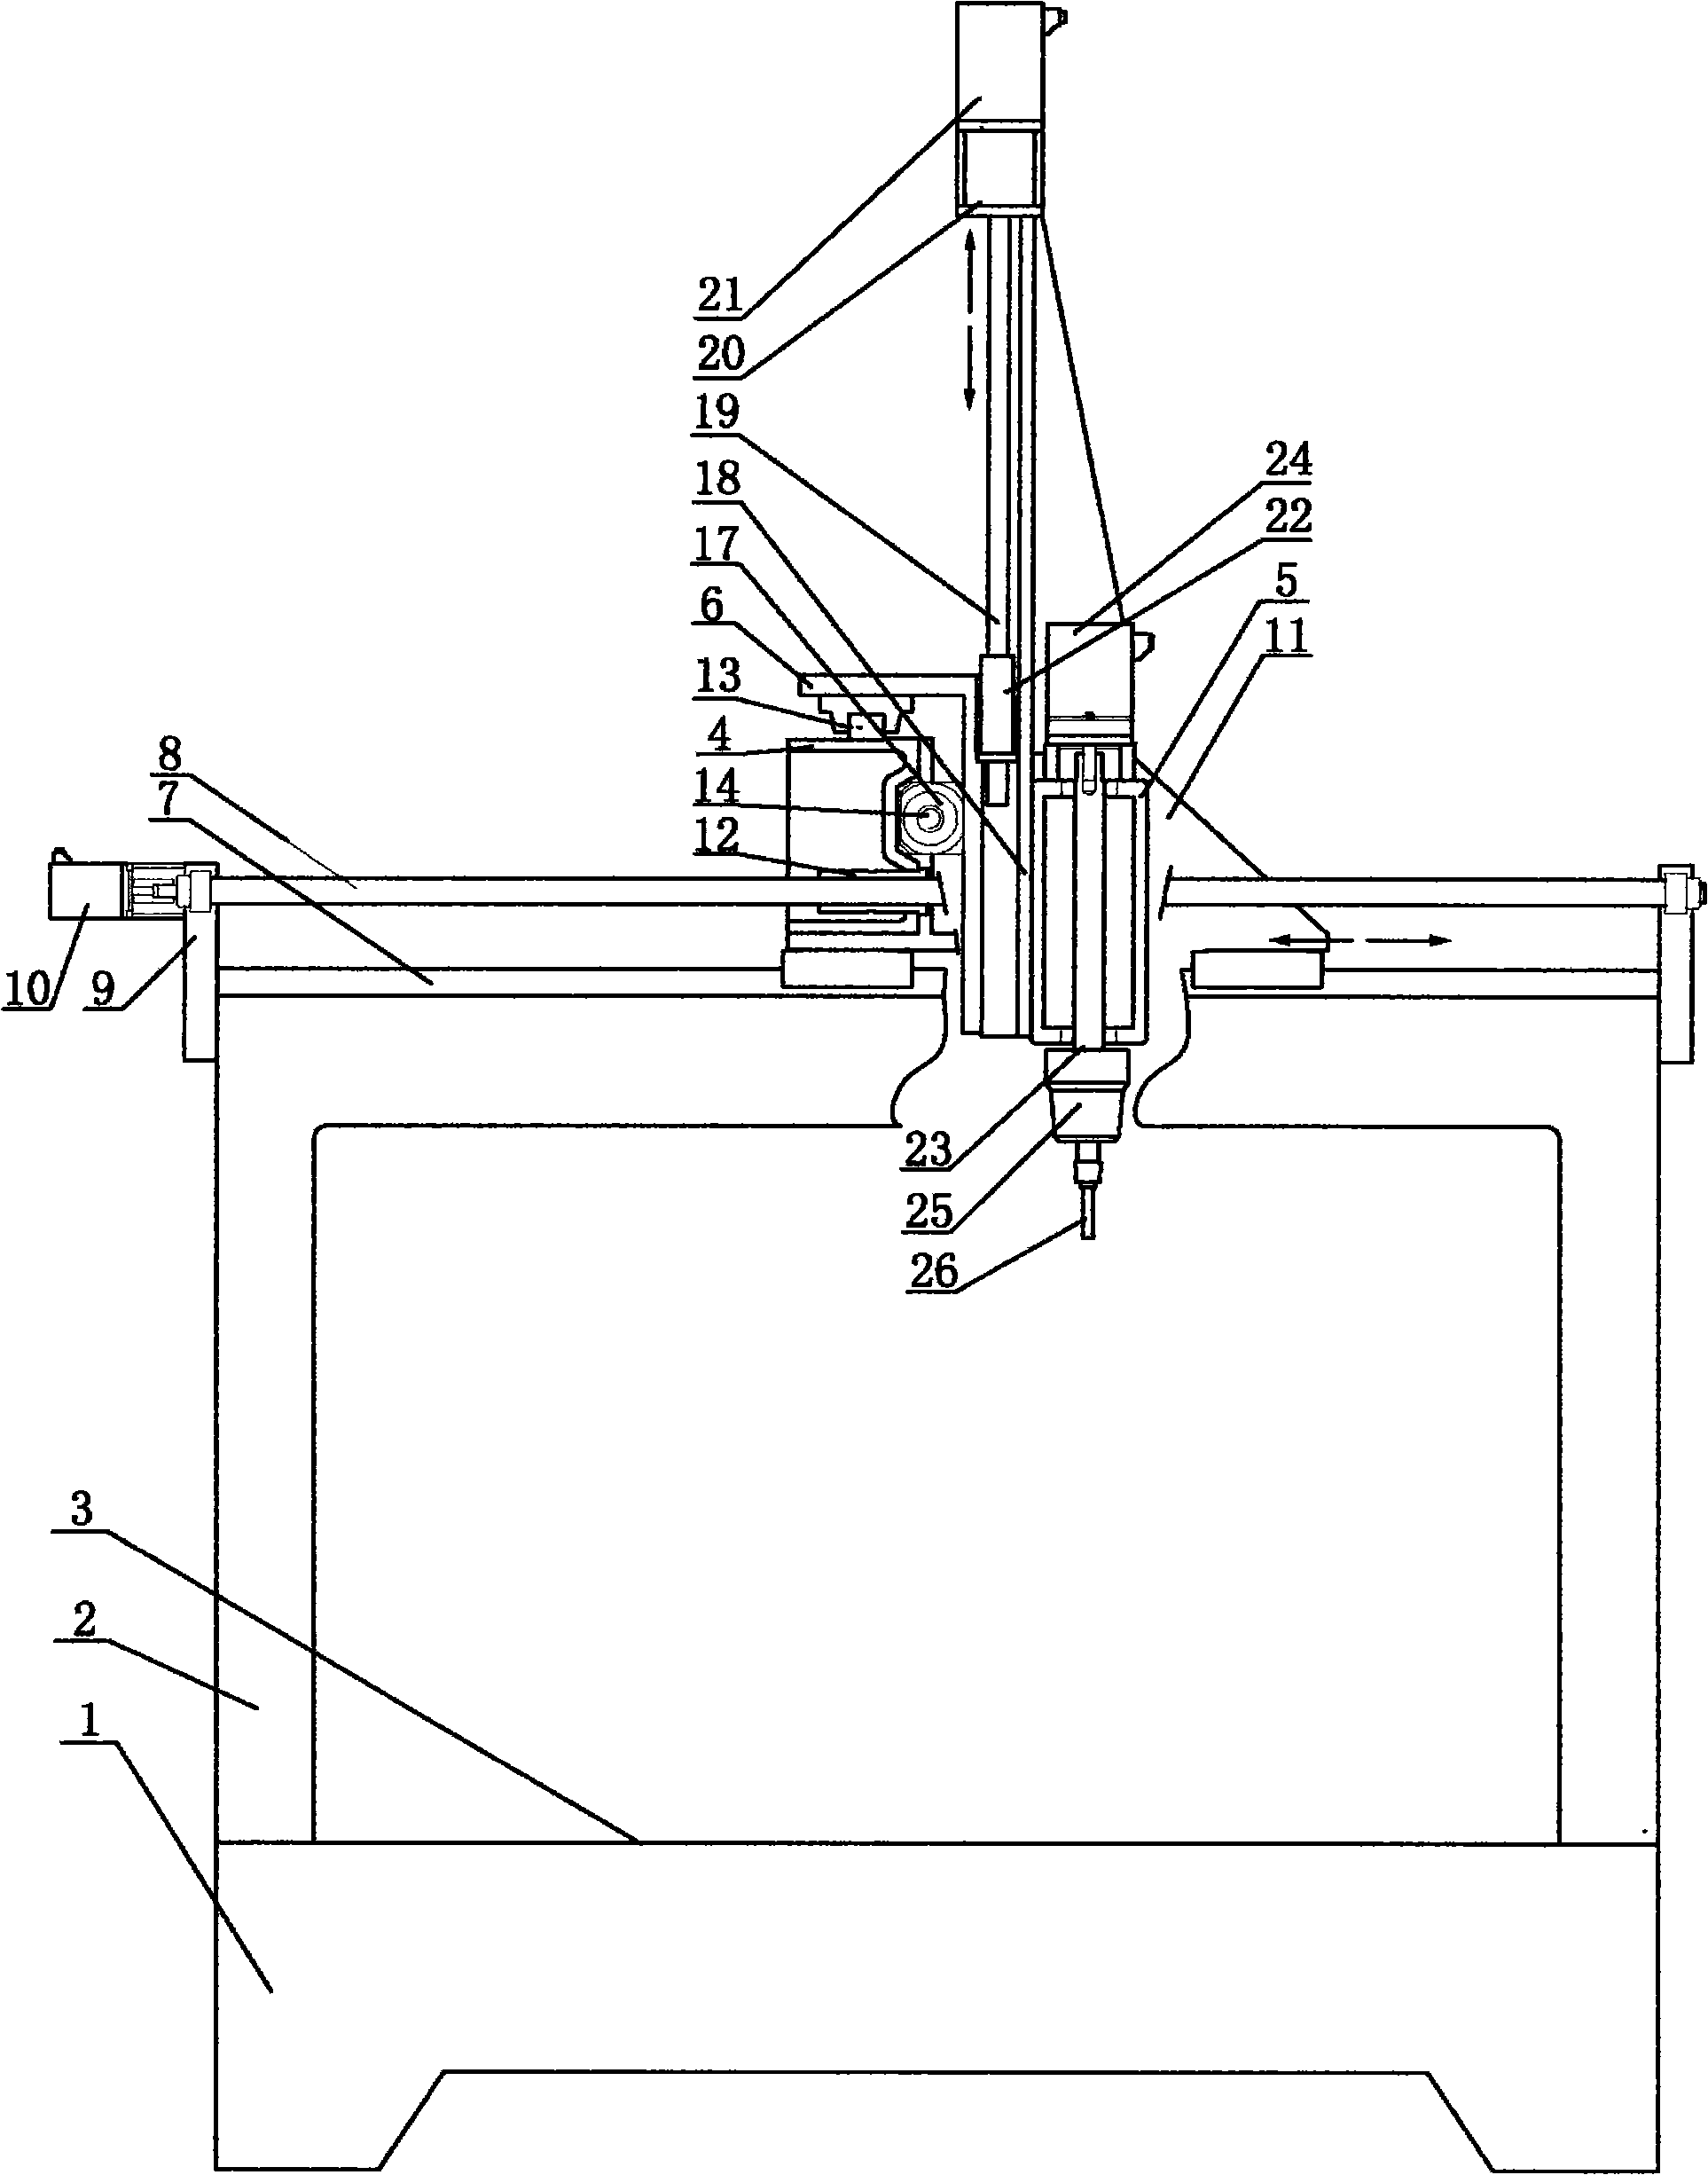 Three-dimensional multi-shaft interlocked numerical controlled engraving and milling device